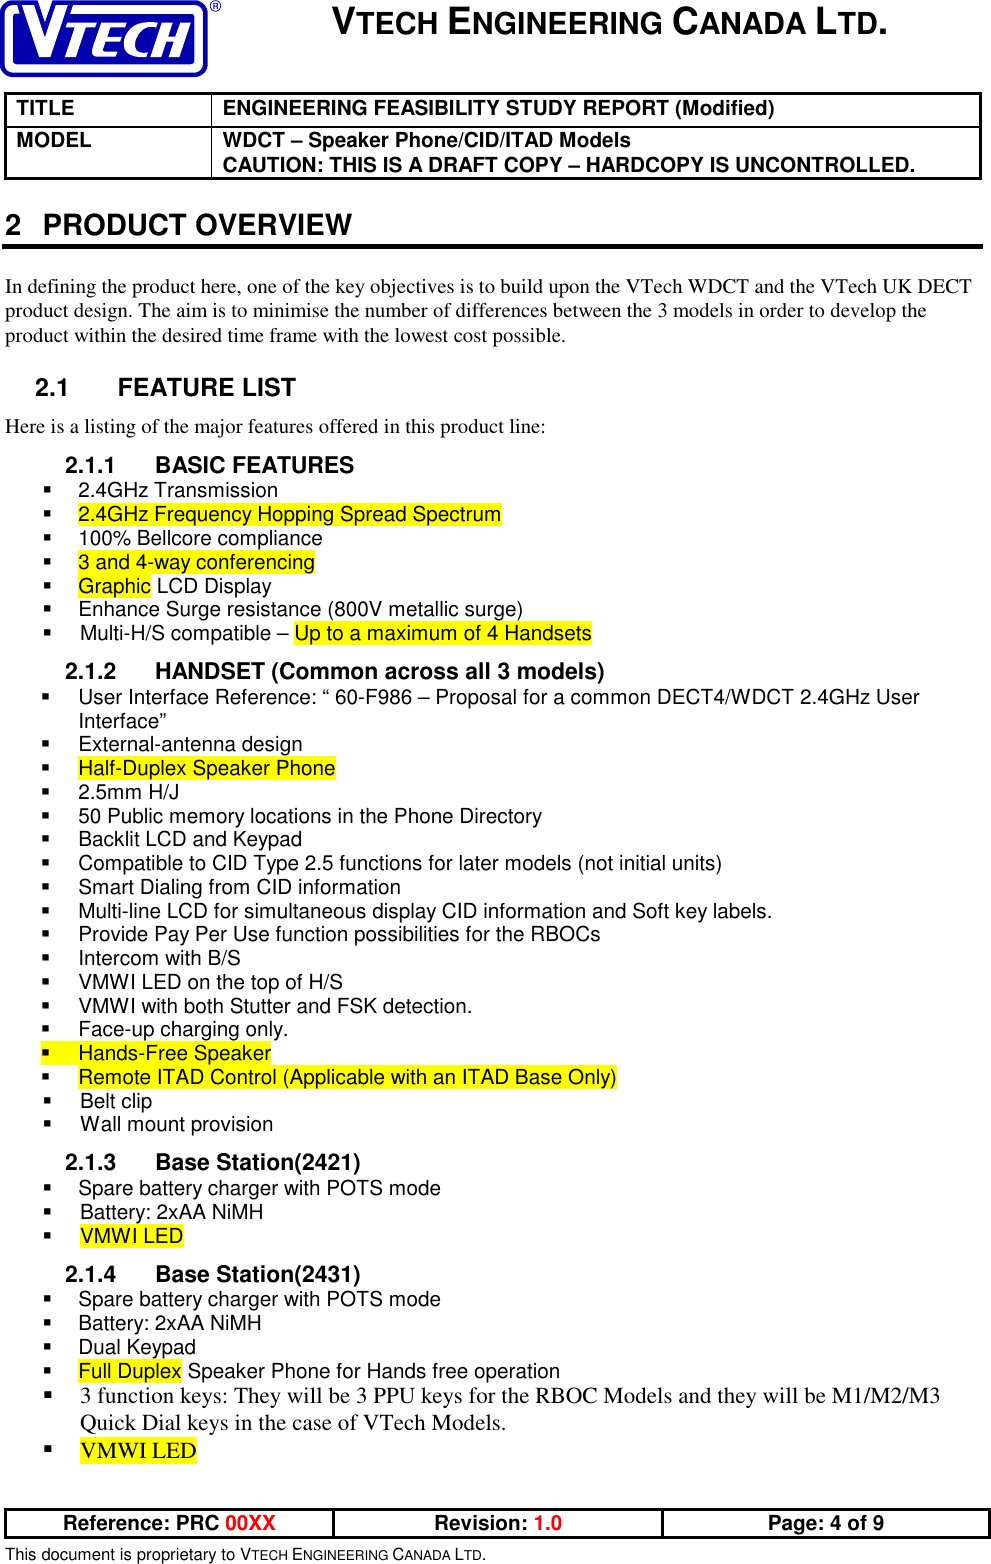 VTECH ENGINEERING CANADA LTD.TITLE ENGINEERING FEASIBILITY STUDY REPORT (Modified)MODEL WDCT – Speaker Phone/CID/ITAD ModelsCAUTION: THIS IS A DRAFT COPY – HARDCOPY IS UNCONTROLLED.Reference: PRC 00XX Revision: 1.0 Page: 4 of 9This document is proprietary to VTECH ENGINEERING CANADA LTD.2 PRODUCT OVERVIEWIn defining the product here, one of the key objectives is to build upon the VTech WDCT and the VTech UK DECTproduct design. The aim is to minimise the number of differences between the 3 models in order to develop theproduct within the desired time frame with the lowest cost possible.2.1 FEATURE LISTHere is a listing of the major features offered in this product line:2.1.1 BASIC FEATURES 2.4GHz Transmission 2.4GHz Frequency Hopping Spread Spectrum  100% Bellcore compliance 3 and 4-way conferencing Graphic LCD Display  Enhance Surge resistance (800V metallic surge)  Multi-H/S compatible – Up to a maximum of 4 Handsets2.1.2  HANDSET (Common across all 3 models)  User Interface Reference: “ 60-F986 – Proposal for a common DECT4/WDCT 2.4GHz UserInterface” External-antenna design Half-Duplex Speaker Phone 2.5mm H/J  50 Public memory locations in the Phone Directory  Backlit LCD and Keypad  Compatible to CID Type 2.5 functions for later models (not initial units)  Smart Dialing from CID information  Multi-line LCD for simultaneous display CID information and Soft key labels.  Provide Pay Per Use function possibilities for the RBOCs  Intercom with B/S  VMWI LED on the top of H/S  VMWI with both Stutter and FSK detection.  Face-up charging only. Hands-Free Speaker Remote ITAD Control (Applicable with an ITAD Base Only) Belt clip  Wall mount provision2.1.3 Base Station(2421)  Spare battery charger with POTS mode  Battery: 2xAA NiMH VMWI LED2.1.4 Base Station(2431)  Spare battery charger with POTS mode  Battery: 2xAA NiMH Dual Keypad Full Duplex Speaker Phone for Hands free operation 3 function keys: They will be 3 PPU keys for the RBOC Models and they will be M1/M2/M3Quick Dial keys in the case of VTech Models. VMWI LED